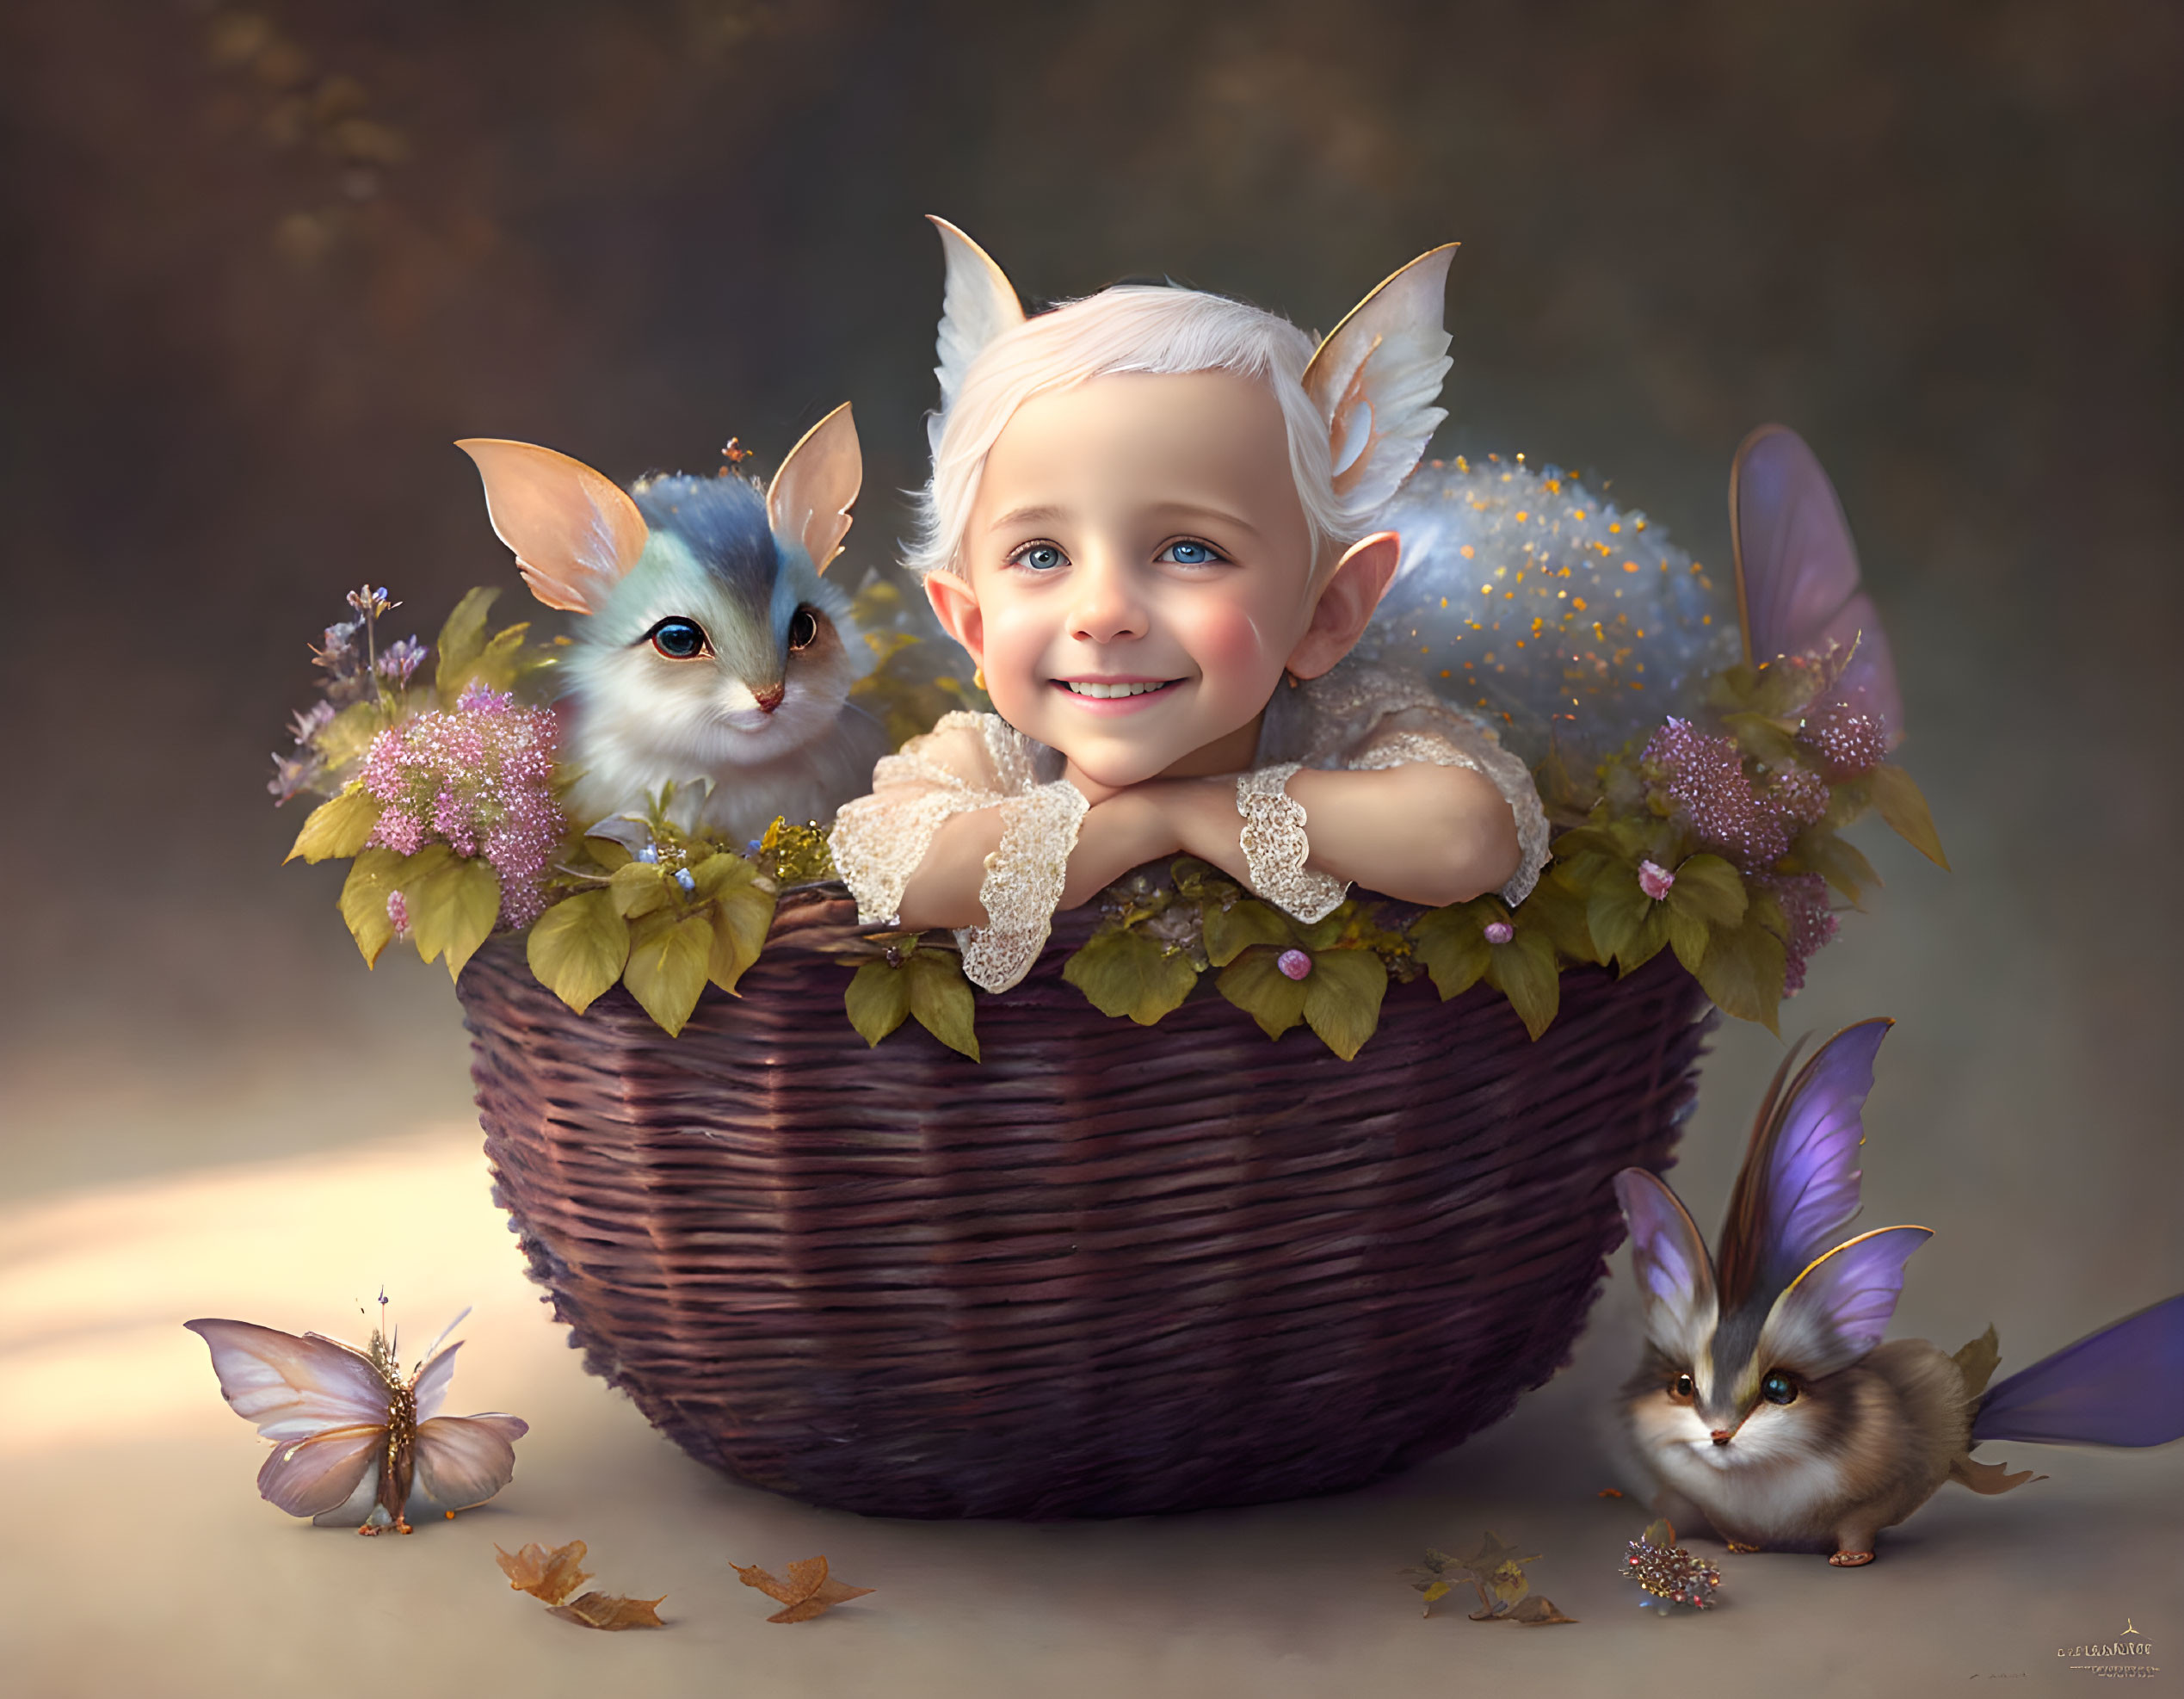 Child with fairy-like features in wicker basket with whimsical creatures